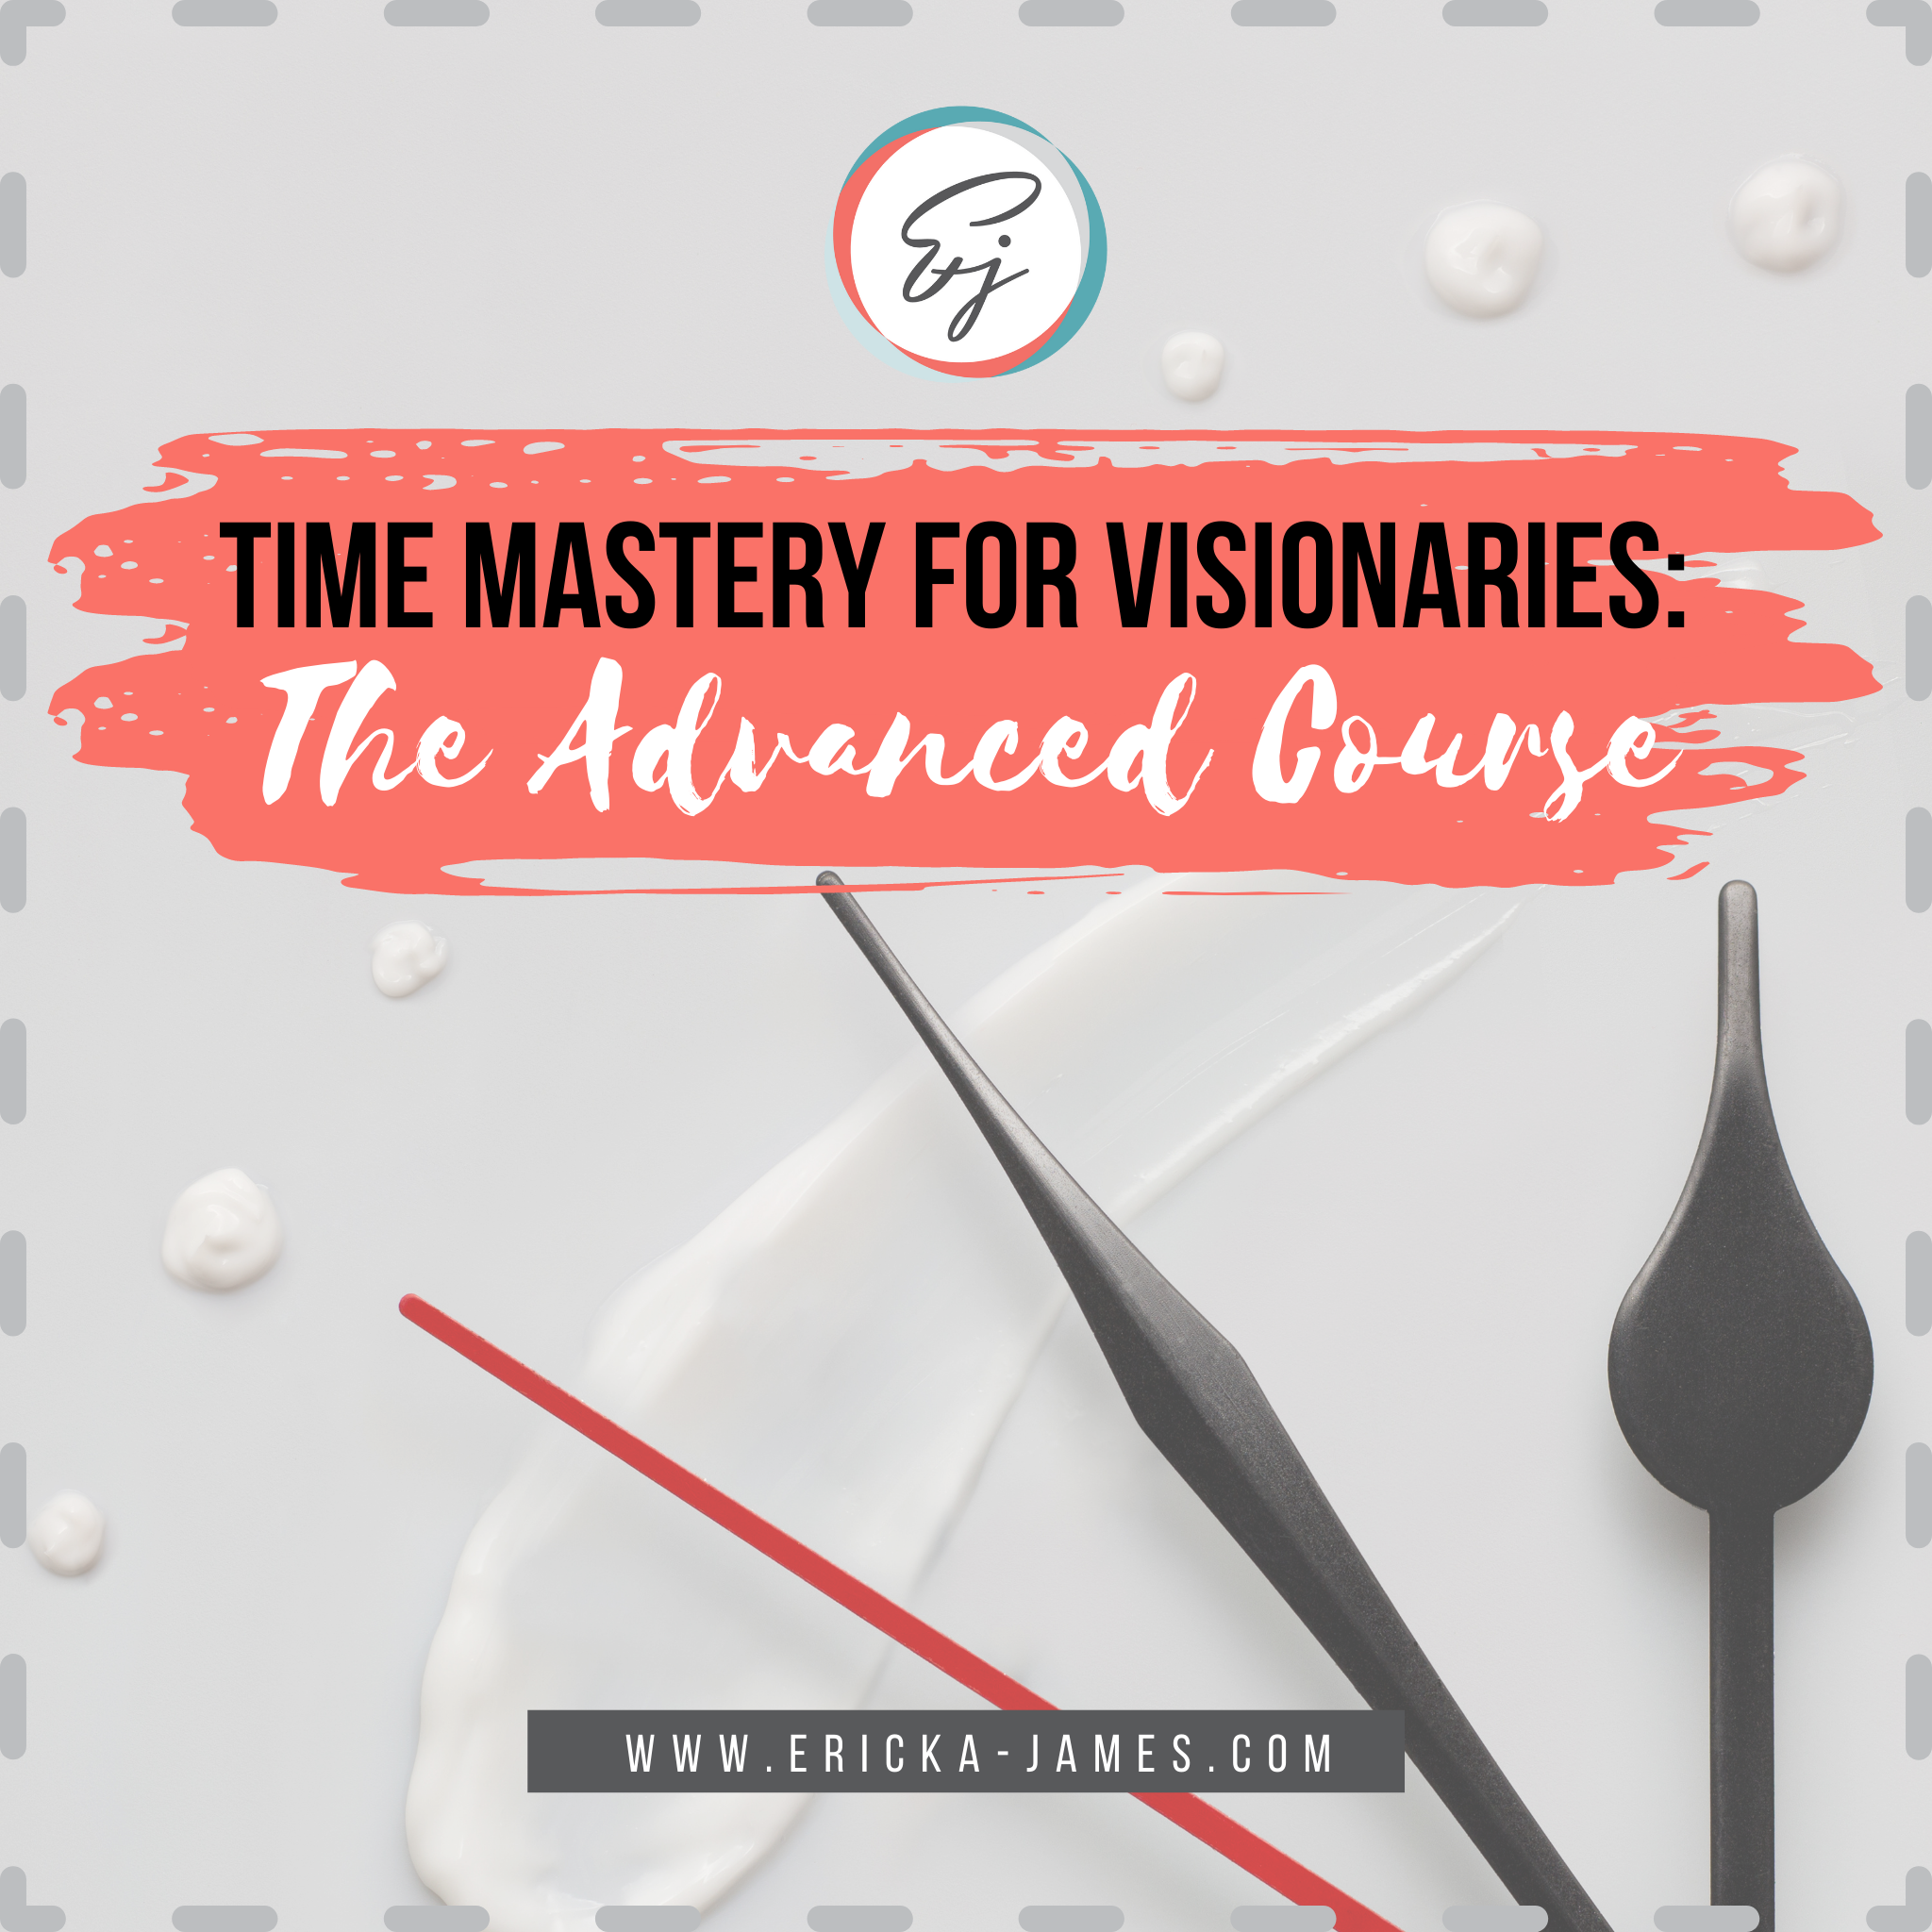 Time Mastery for Visionaries: The Advanced Course